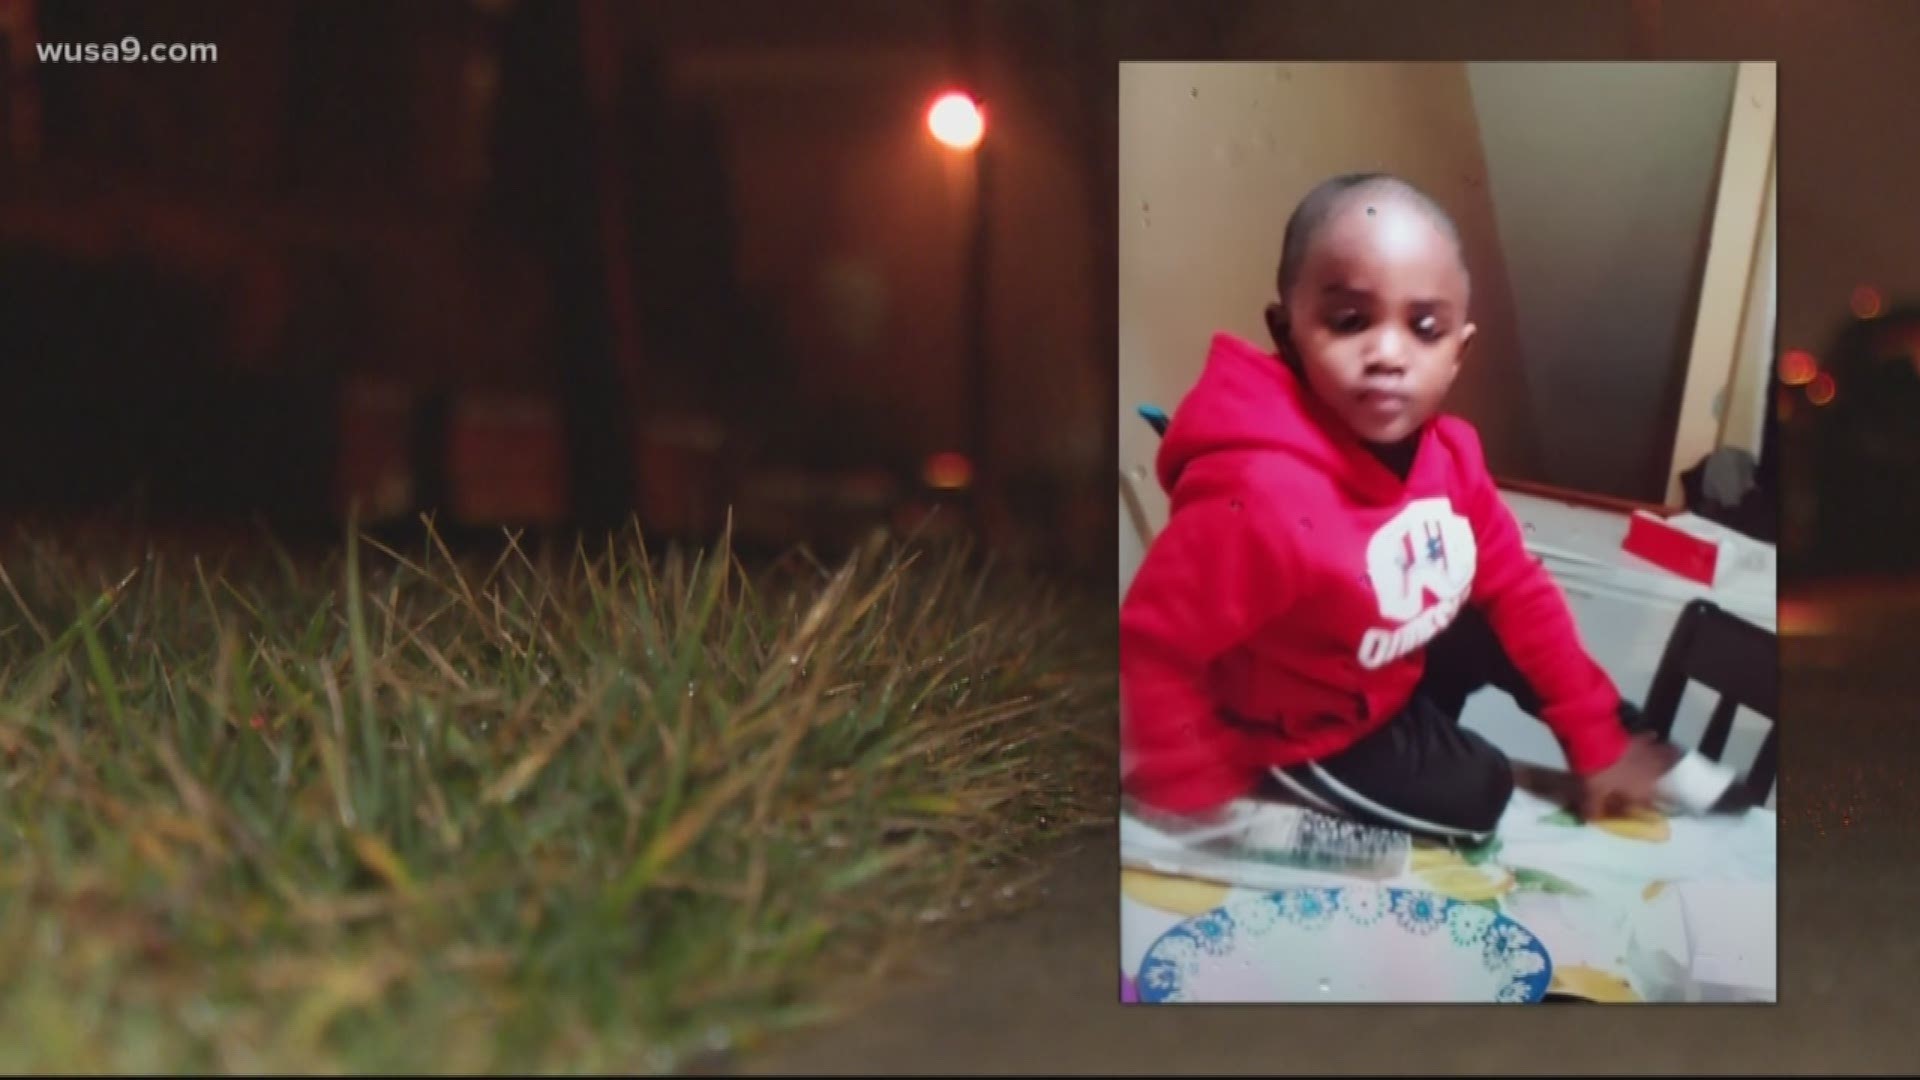 Police said two-year-old Ethan Adeyemi had wandered from his home around 10 p.m. Wednesday. A postal worker found him alone Thursday morning on the side of I-95.